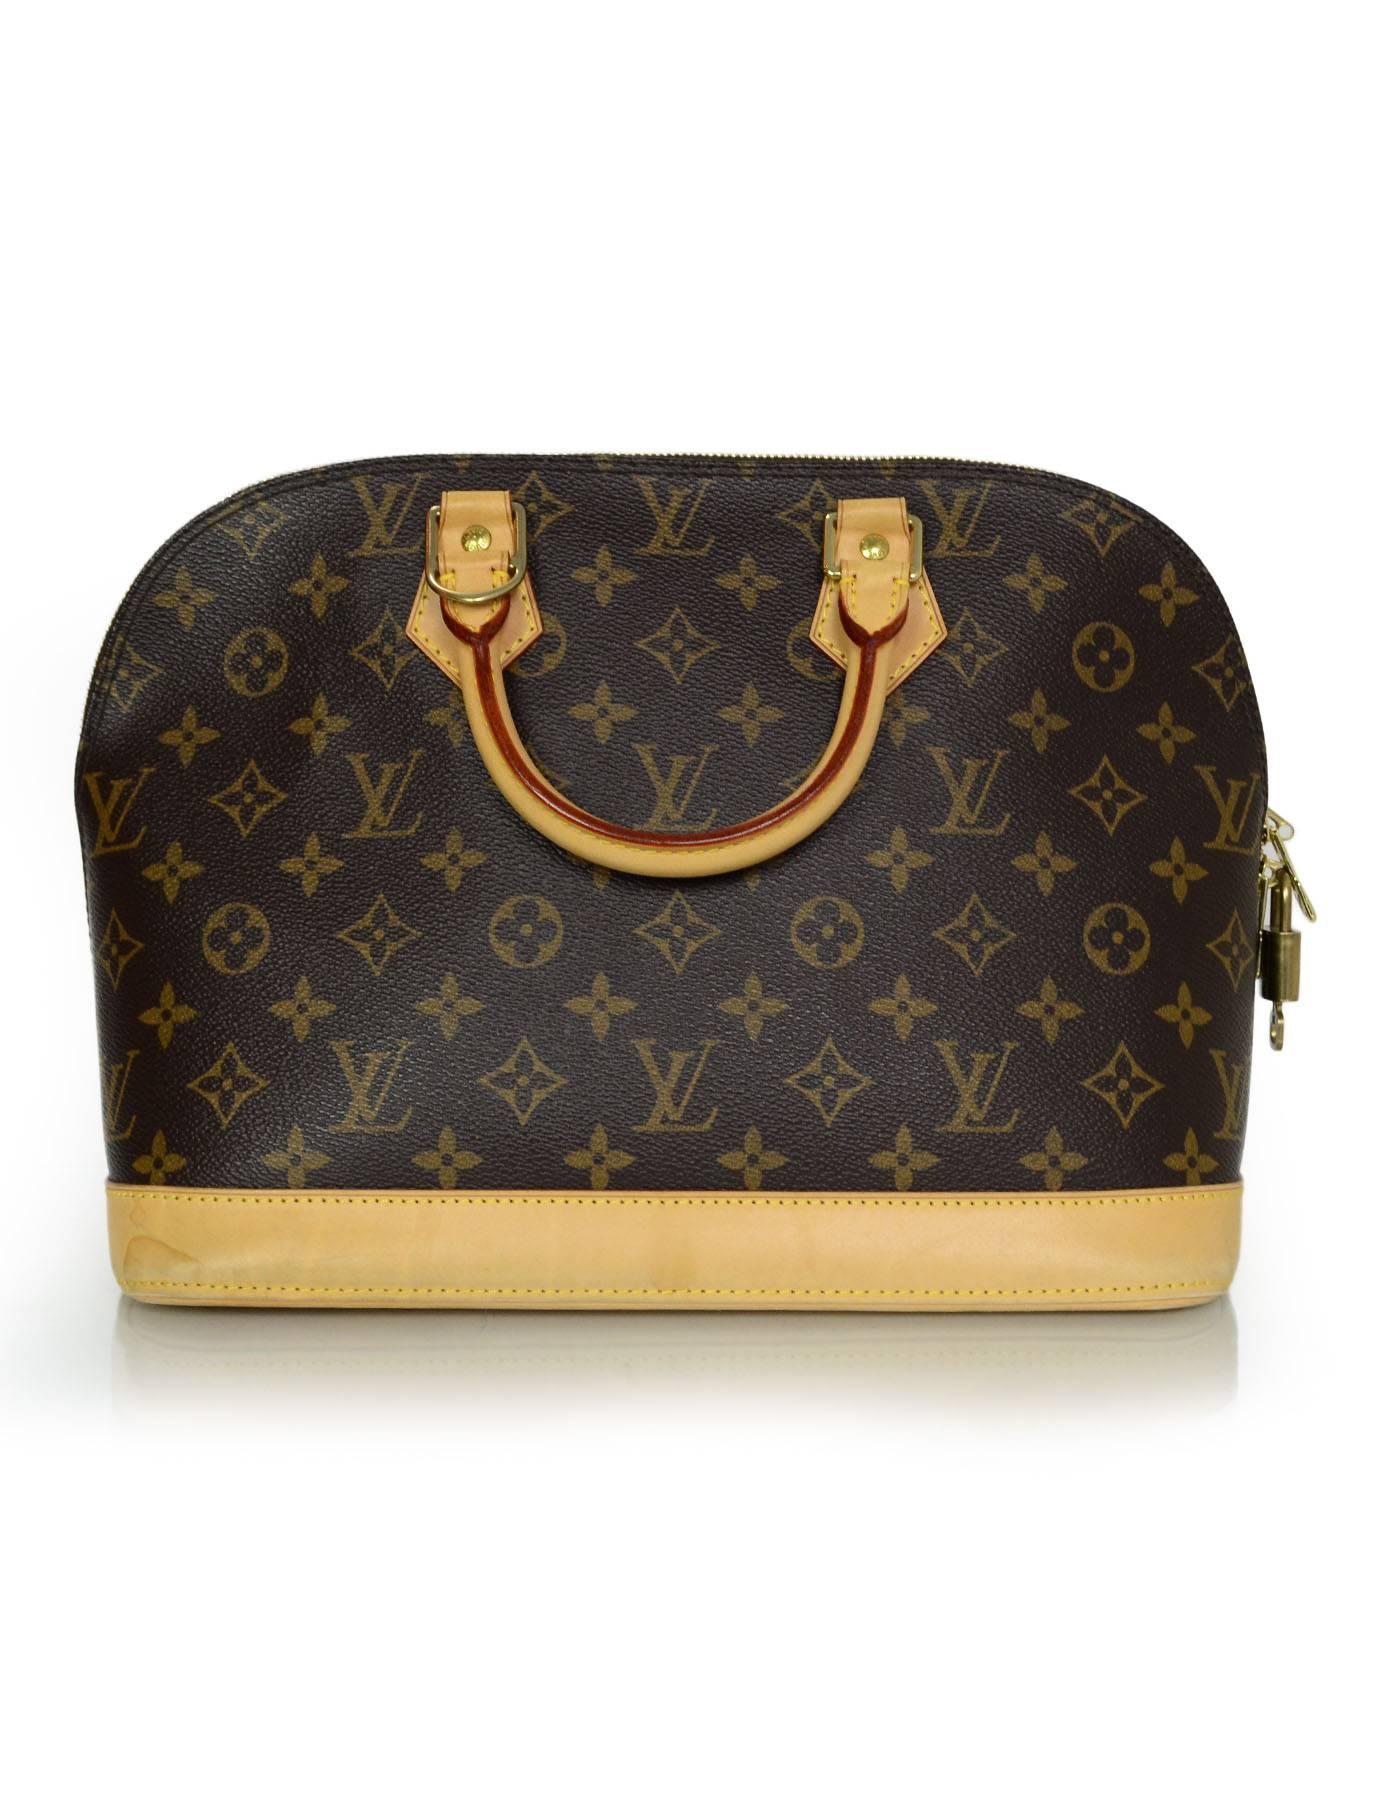 Louis Vuitton Monogram Alma PM Bag In Excellent Condition In New York, NY